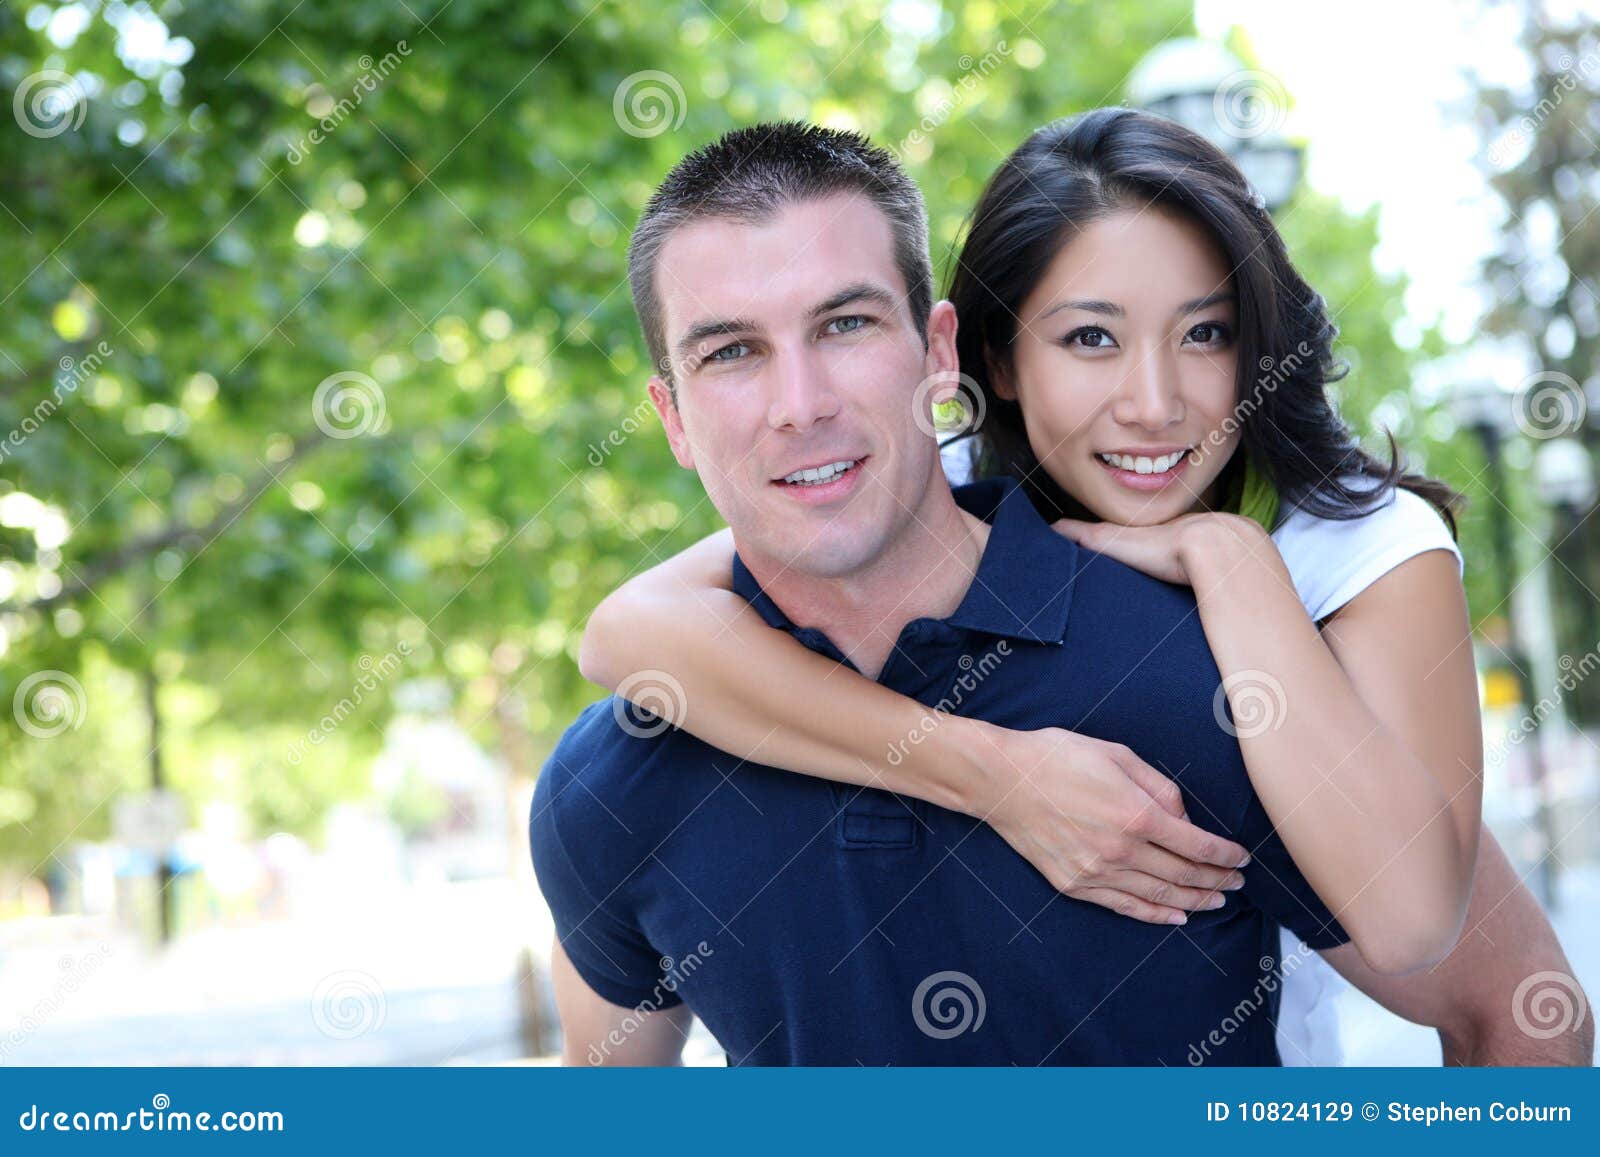 Married For Men Dating Looking Asian Book